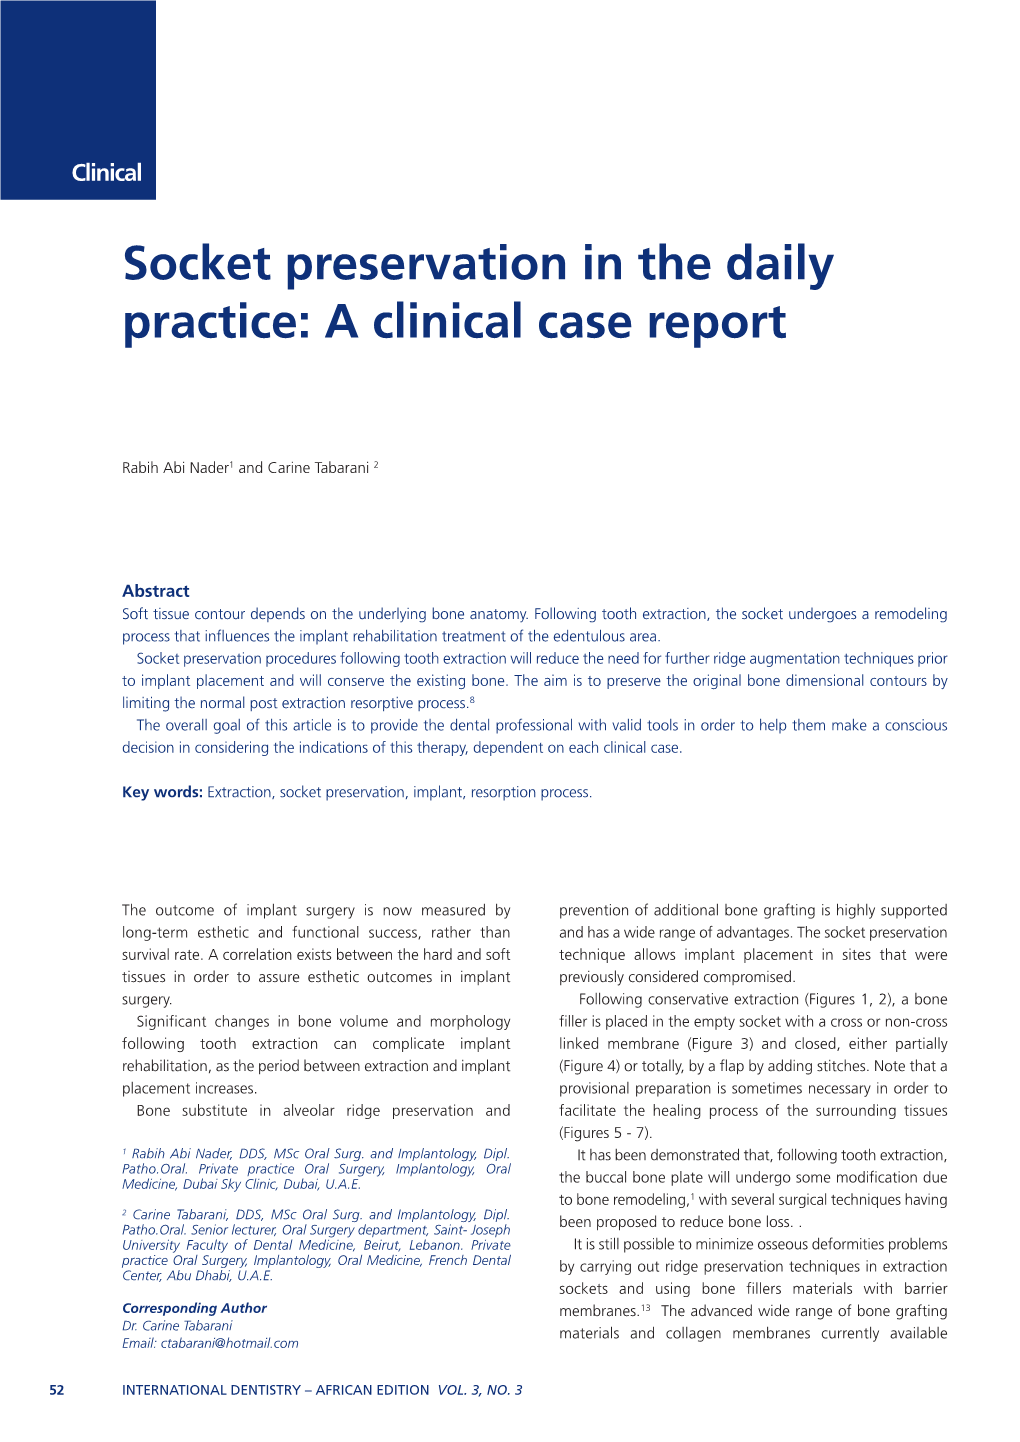 Socket Preservation in the Daily Practice: a Clinical Case Report